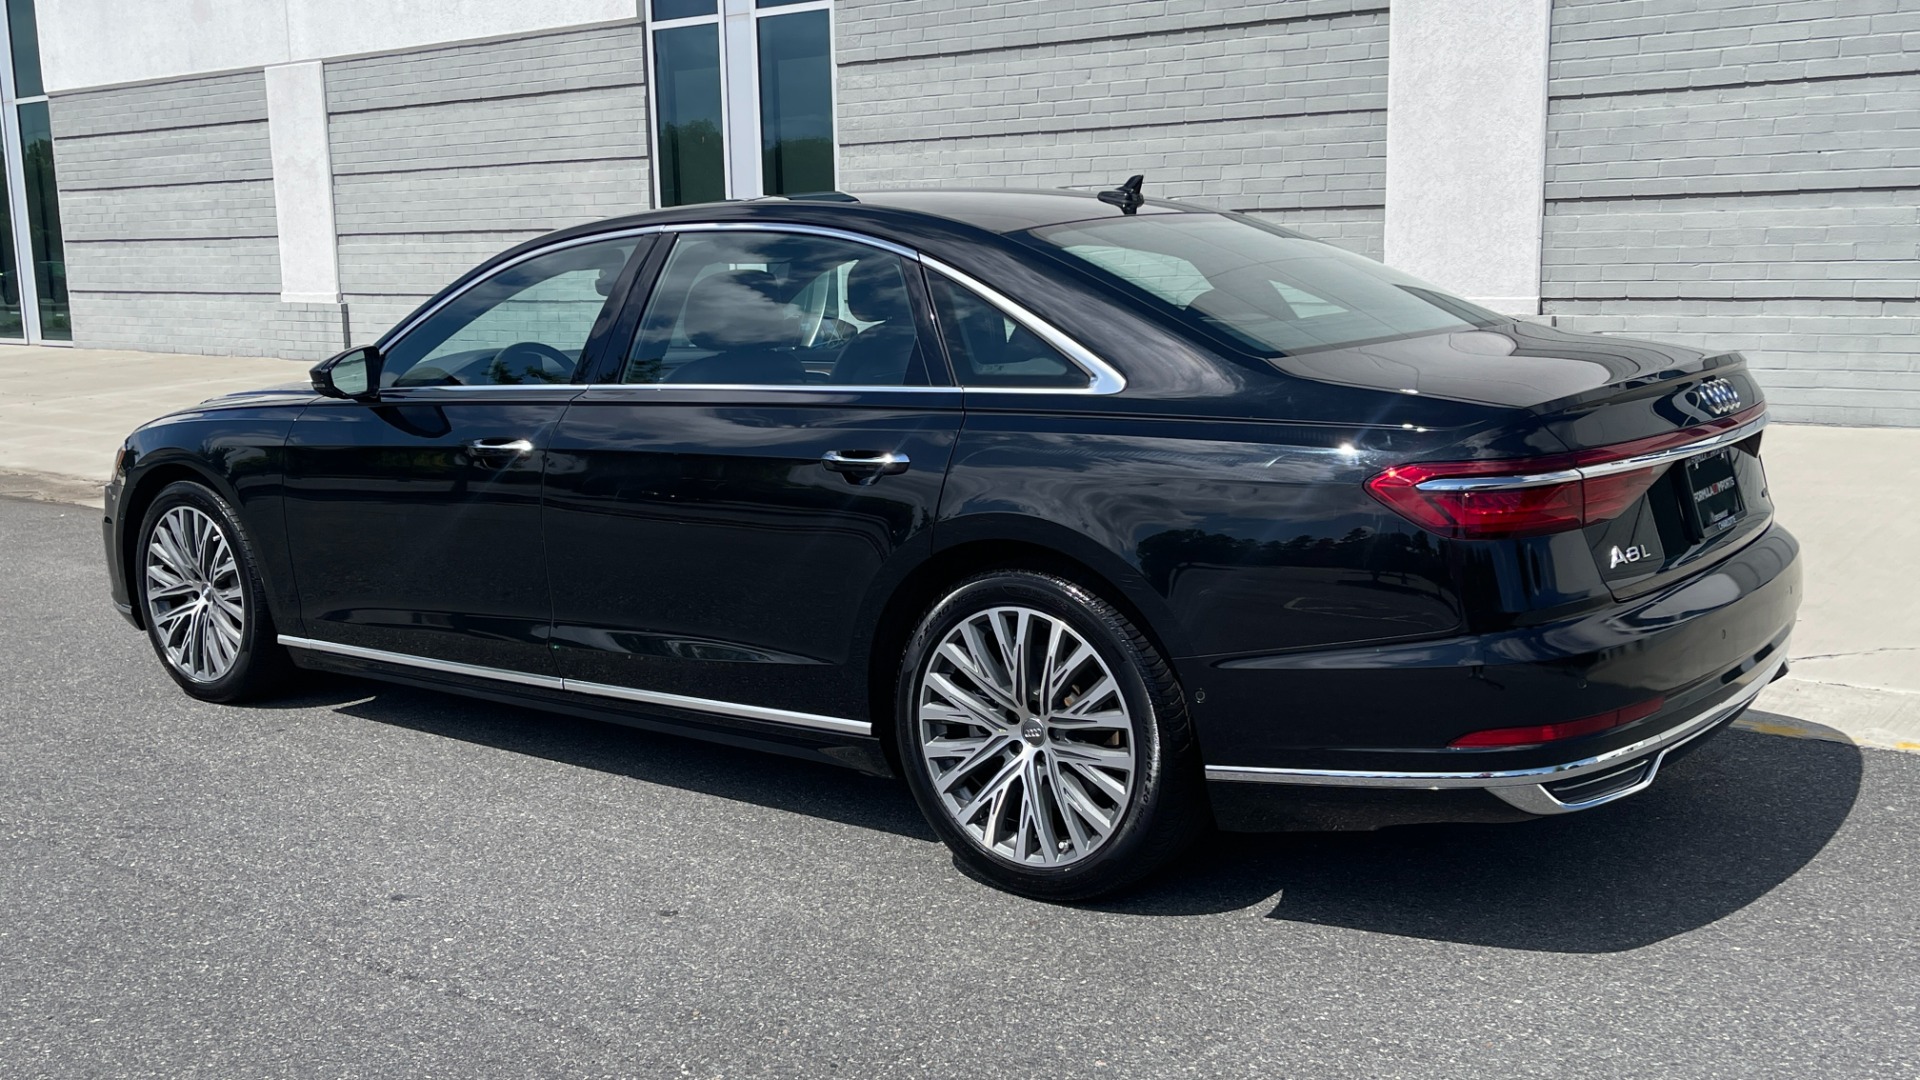 Used 2019 Audi A8L 20IN WHEELS / DRIVER ASSIST / COLD WEATHER / EXECUTIVE PACKAGE for sale $53,995 at Formula Imports in Charlotte NC 28227 3